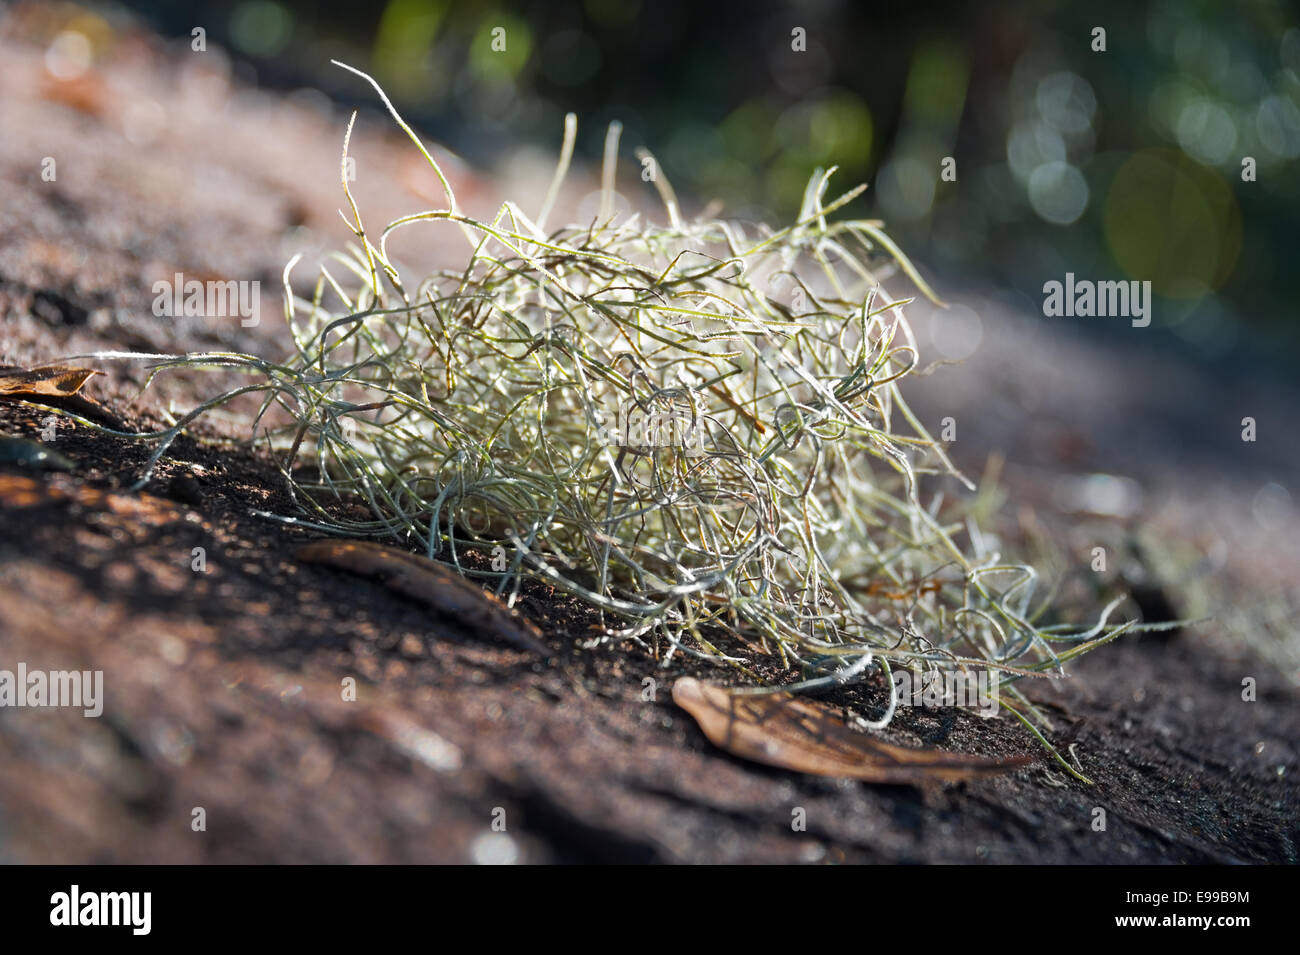 Sunlit tangle of Spanish Moss in the Timucuan Ecological and Historic Preserve at Jacksonville, Florida. Stock Photo